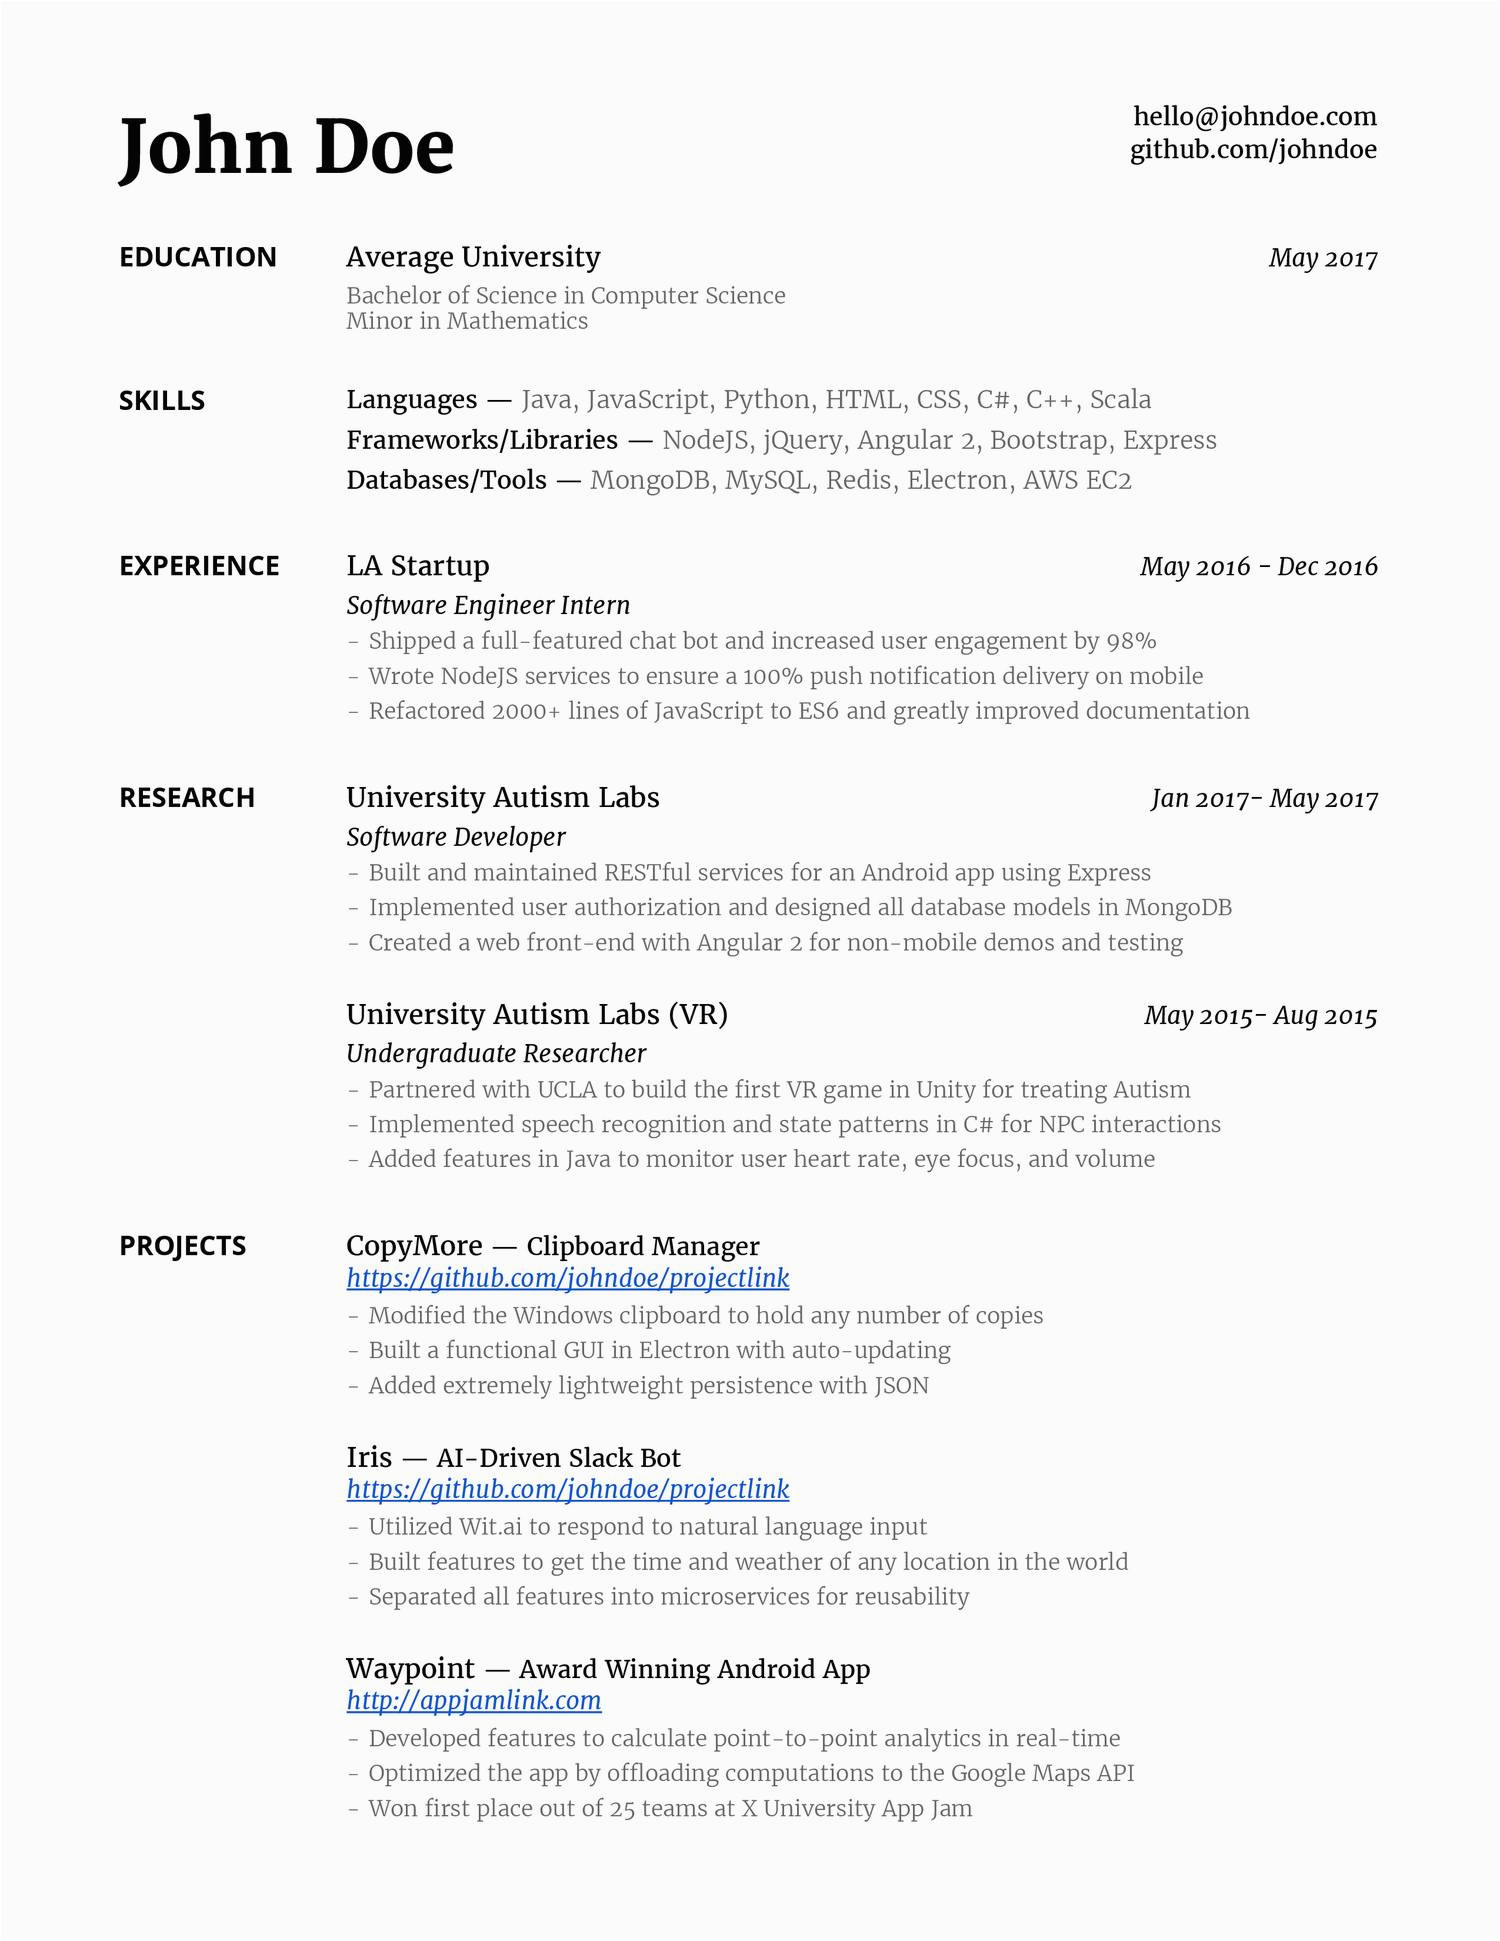 Sample Resume for Two Year Experience In Aws Aws Resume for 2 Years Experience Pdf Best Resume Examples